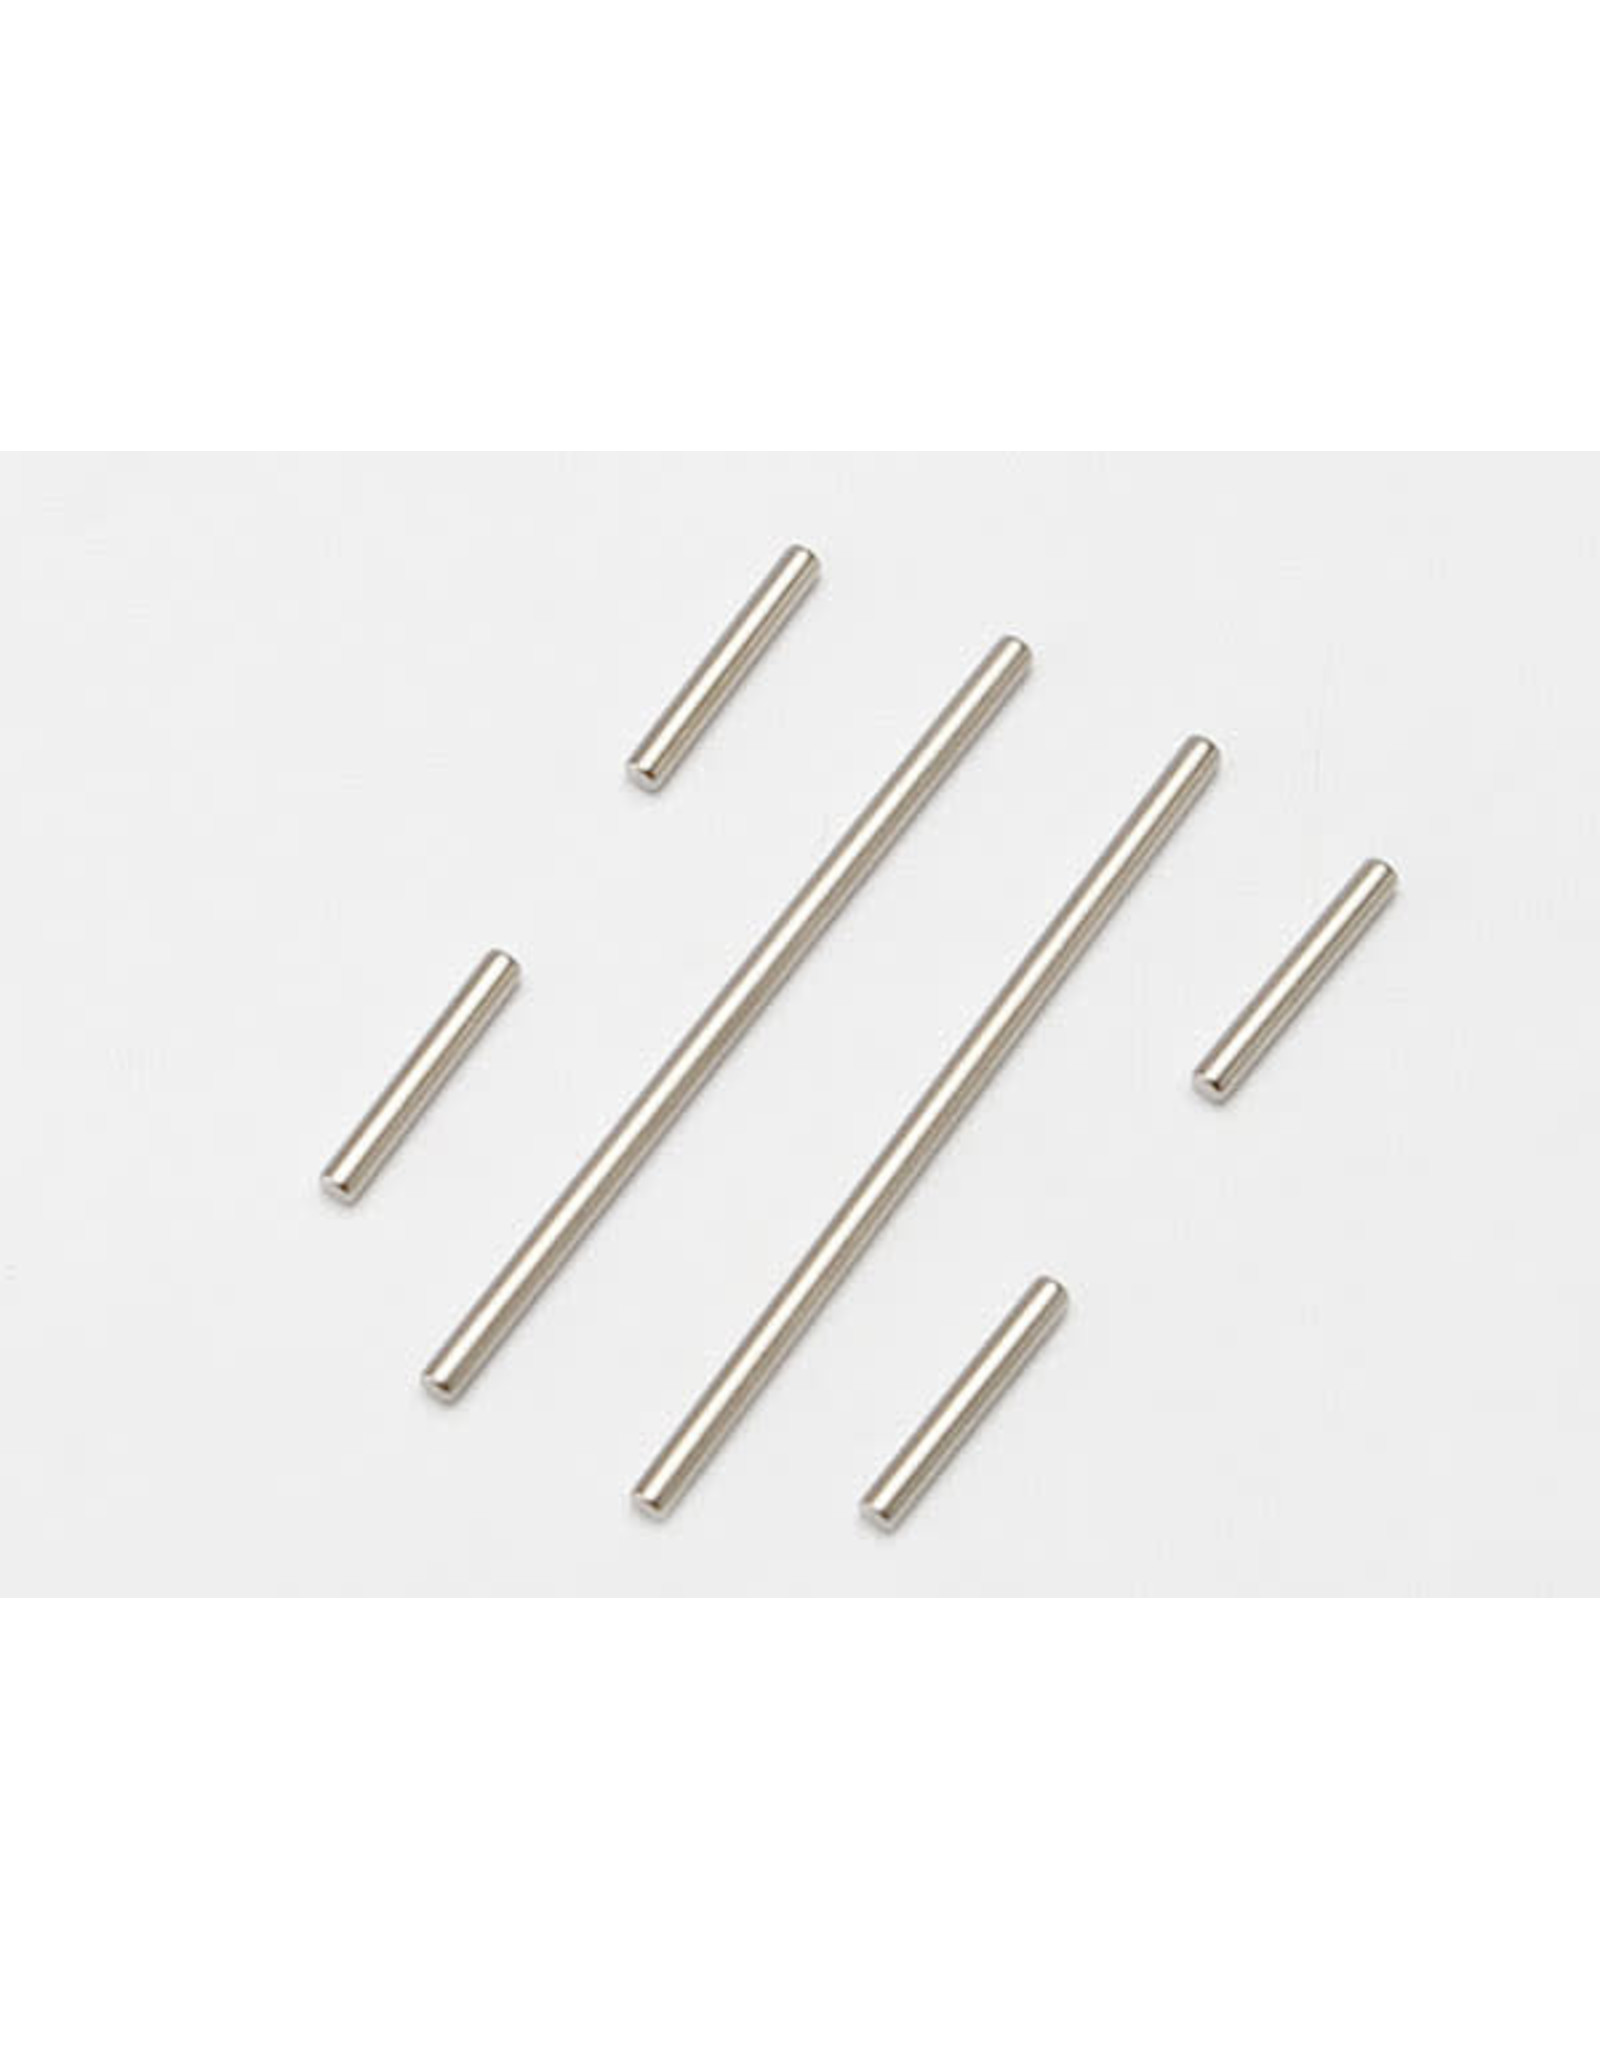 Traxxas Suspension pin set (front or rear), 2x46mm (2), 2x14mm (4)